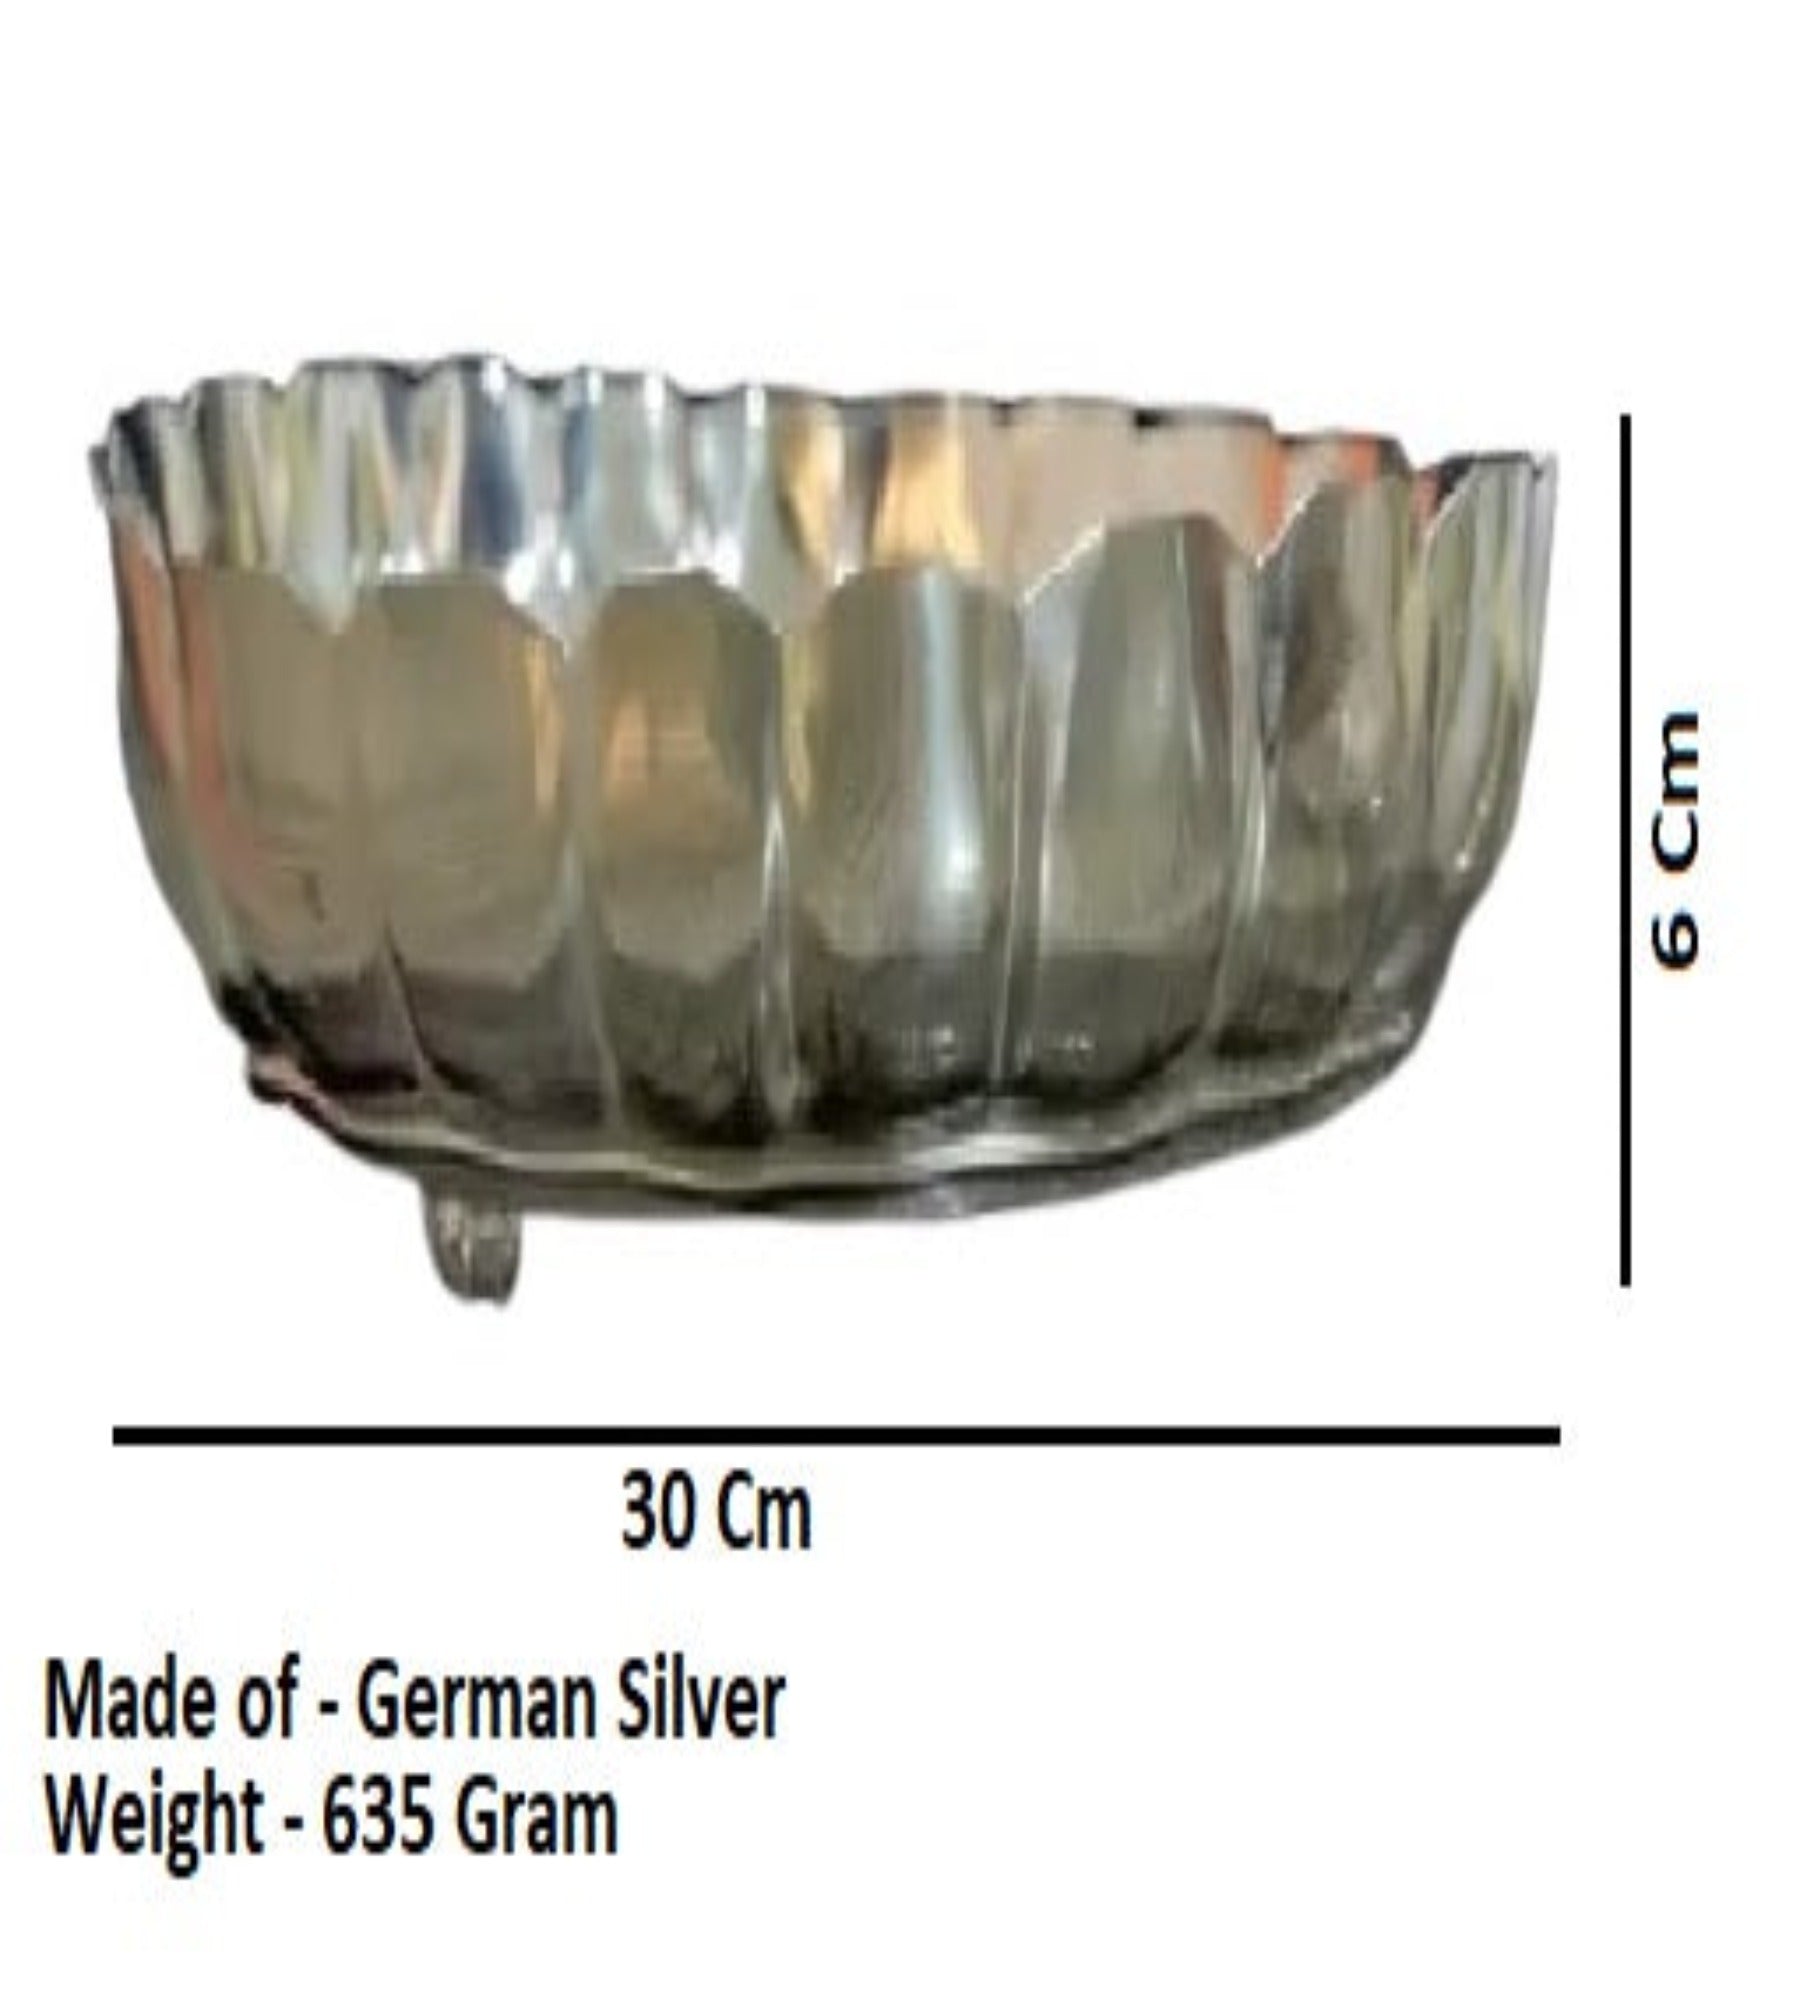 German Silver 12 Inch Floral Design Plate With Stand For Home Pooja Decor K3804